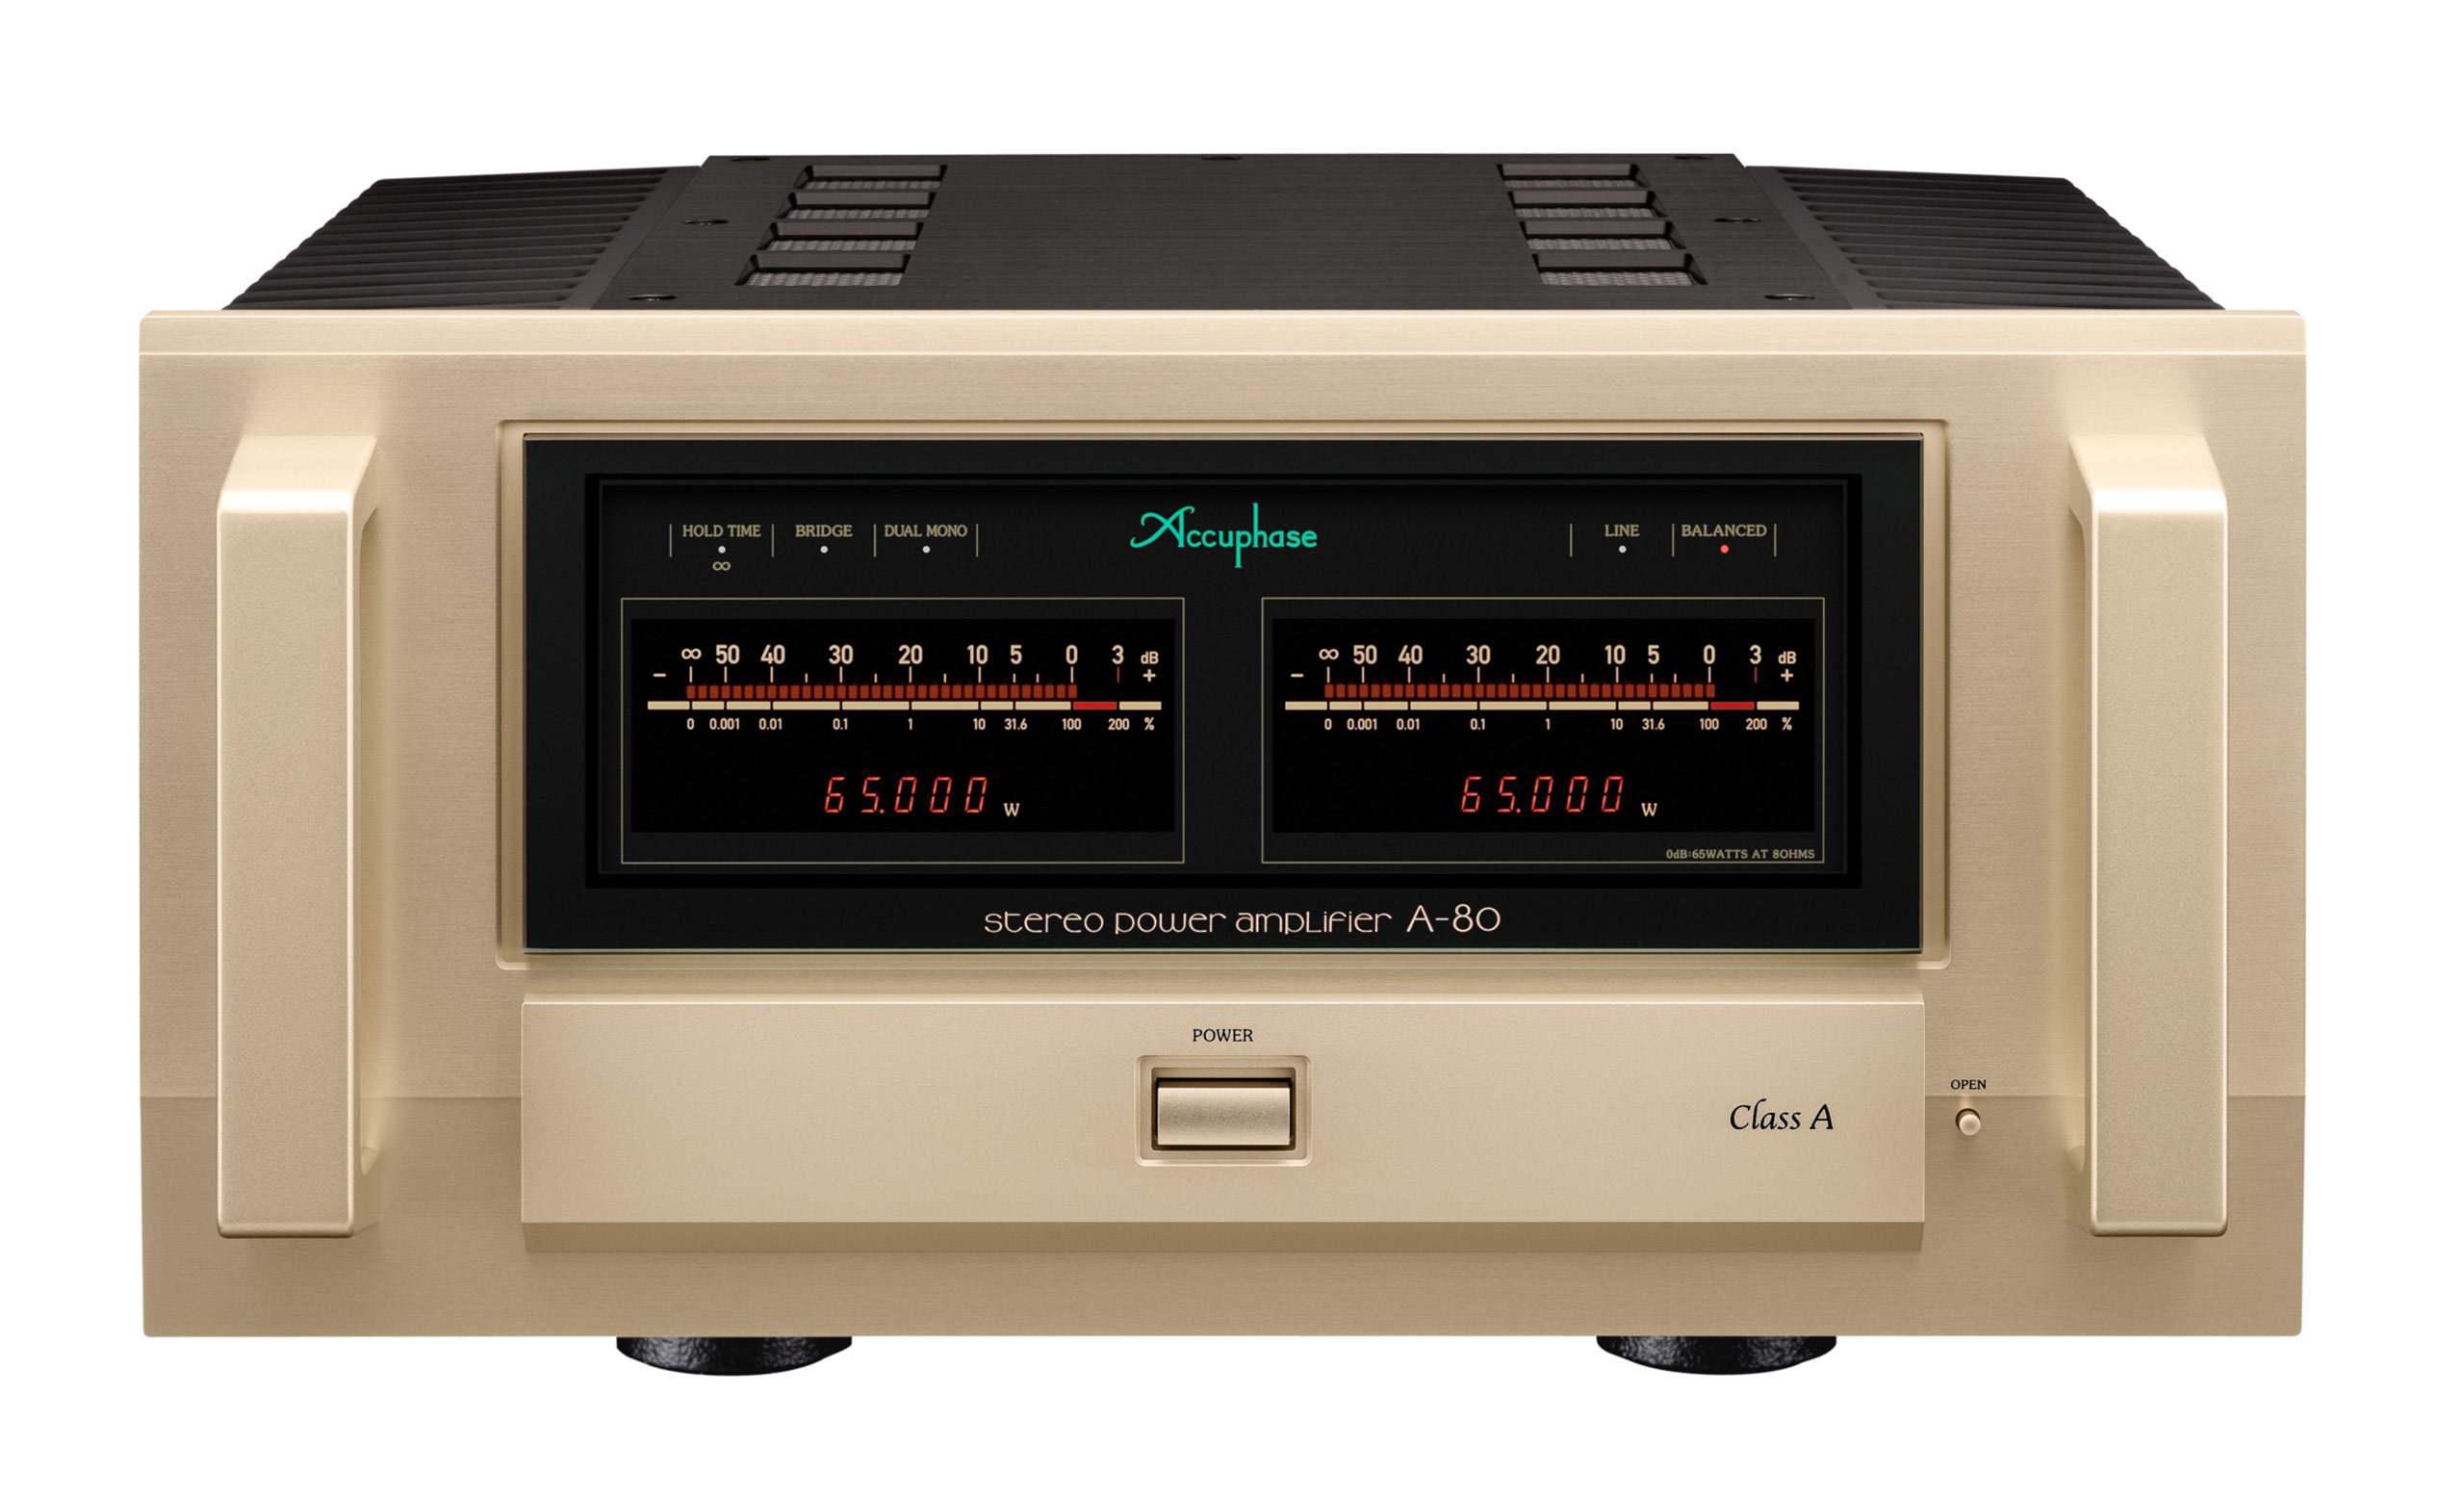 Accuphase A-80 Endstufe